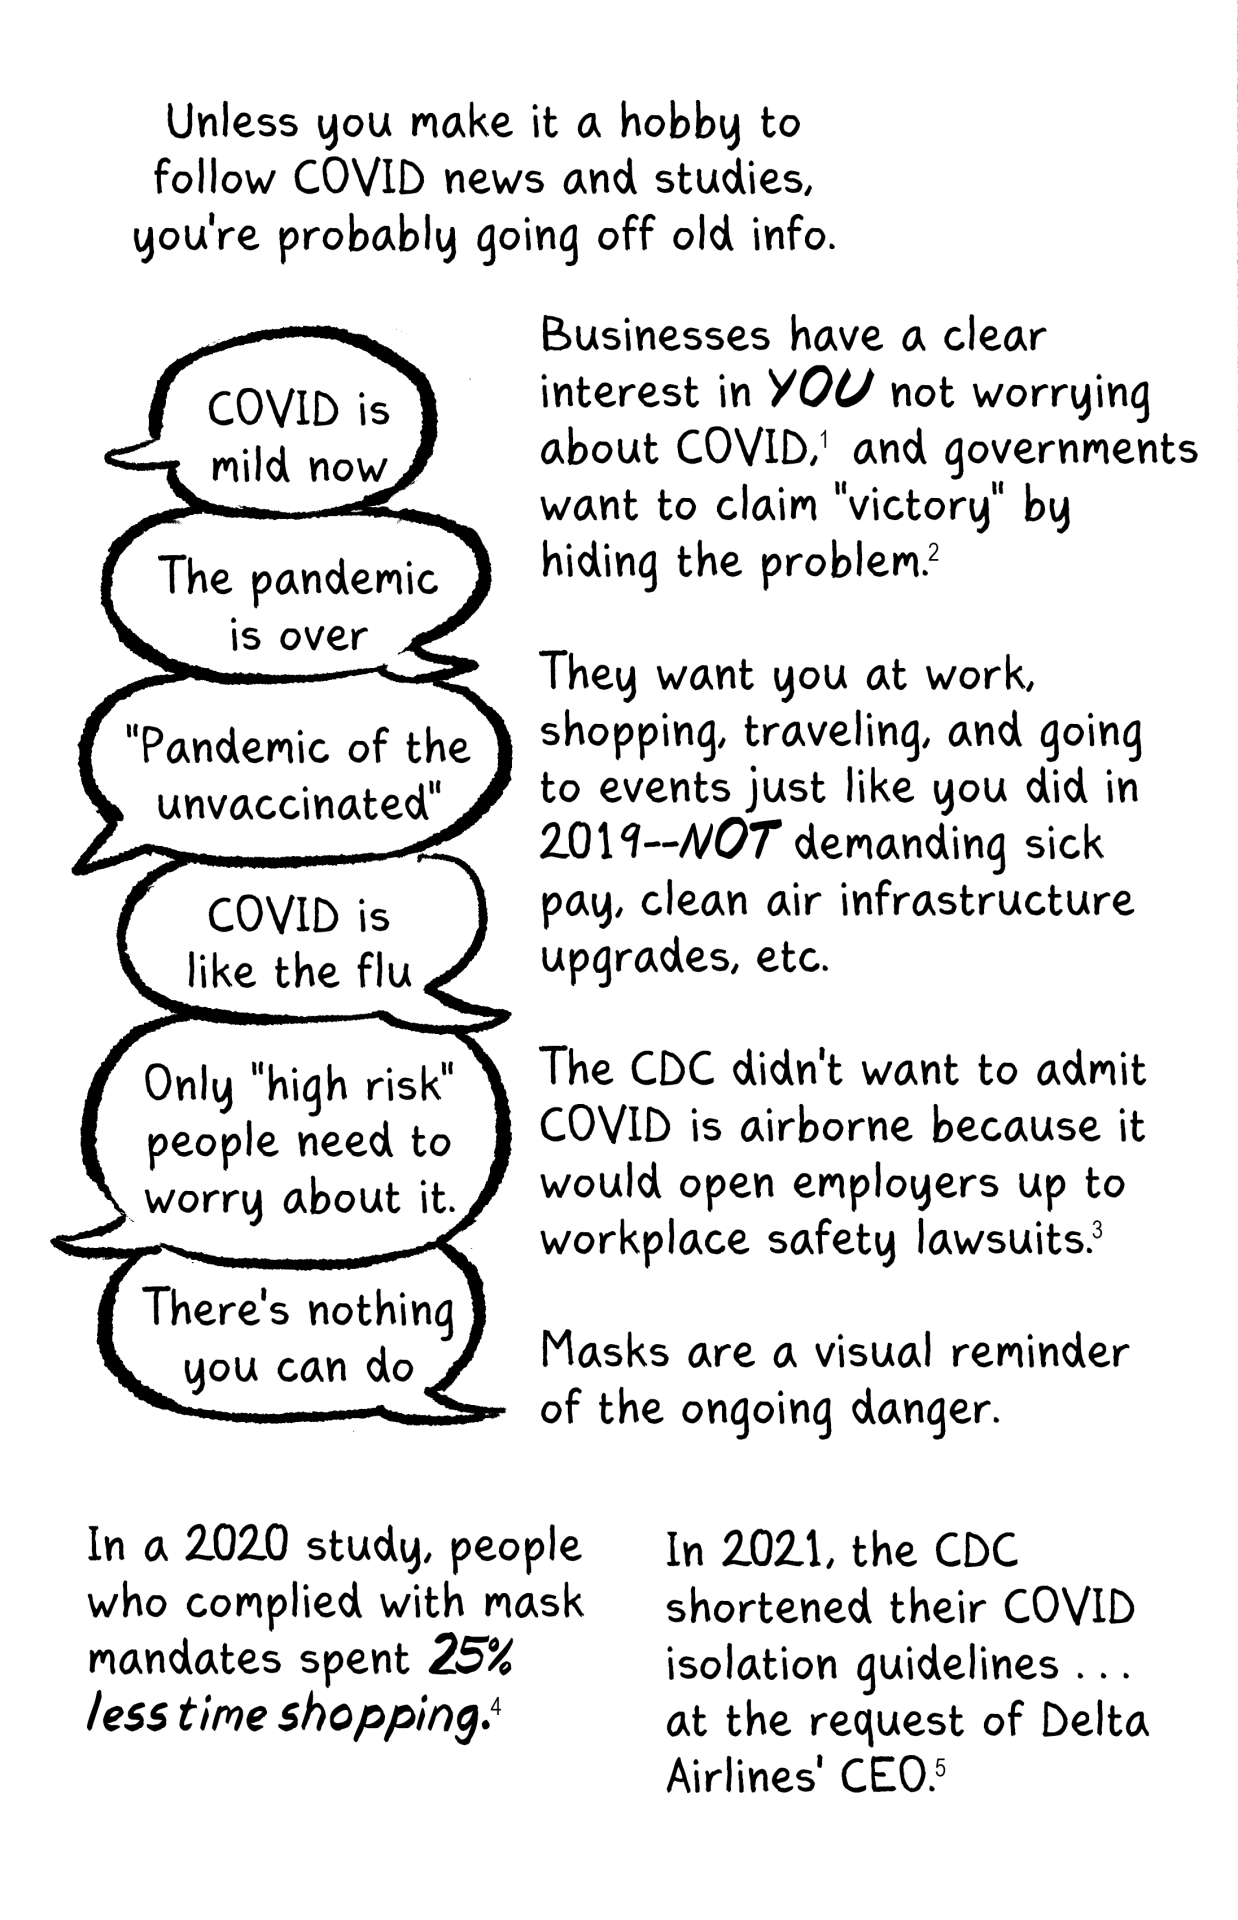 COVID zine page 1  Unless you make it a hobby to follow COVID news and studies, you're probably going off old info. [stack of word balloons coming from different directions] "COVID is mild now" "The pandemic is over" "'Pandemic of the unvaccinated'" "COVID is like the flu" "Only 'high risk' people need to worry about it." "There's nothing you can do."  Businesses have a clear interest in YOU not worrying about COVID, and governments want to claim "victory" by hiding the problem.   They want you at work, shopping, traveling, and going to events just like you did in 2019--NOT demanding sick pay, clean air infrastructure upgrades, etc.  The CDC didn't want to admit COVID is airborne because it would open employers up to workplace safety lawsuits.  Masks are a visual reminder of the ongoing danger.  In a 2020 study, people who complied with mask mandates spent *25% less time shopping.*  In 2021, the CDC shortened their COVID isolation guidelines...at the request of Delta Airlines' CEO.